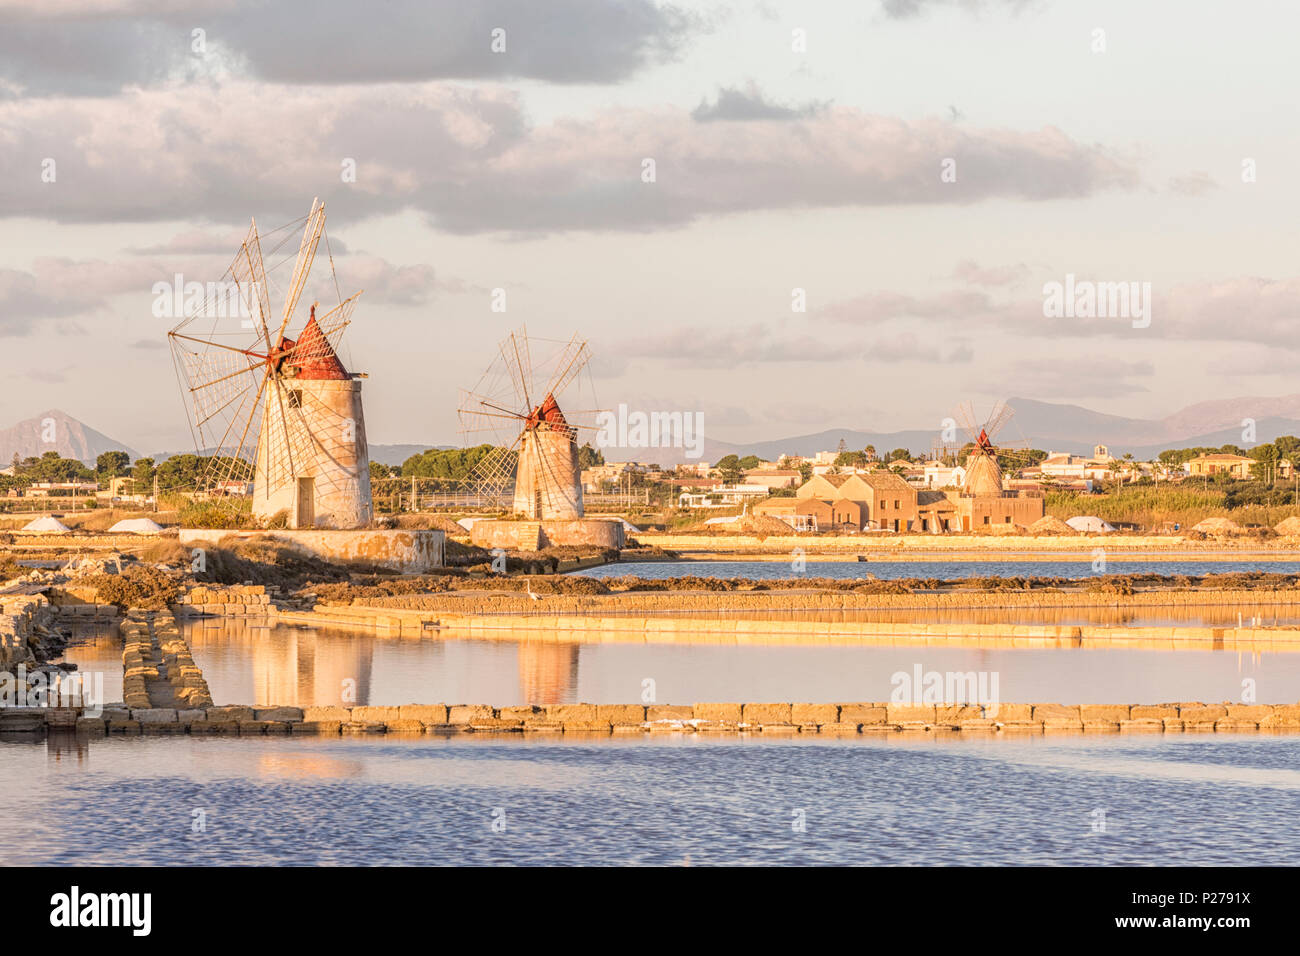 Salt pans with rows of tanks and two fully functional windmills on the coast connecting Marsala to Trapani, Trapani province, Sicily, Italy Stock Photo